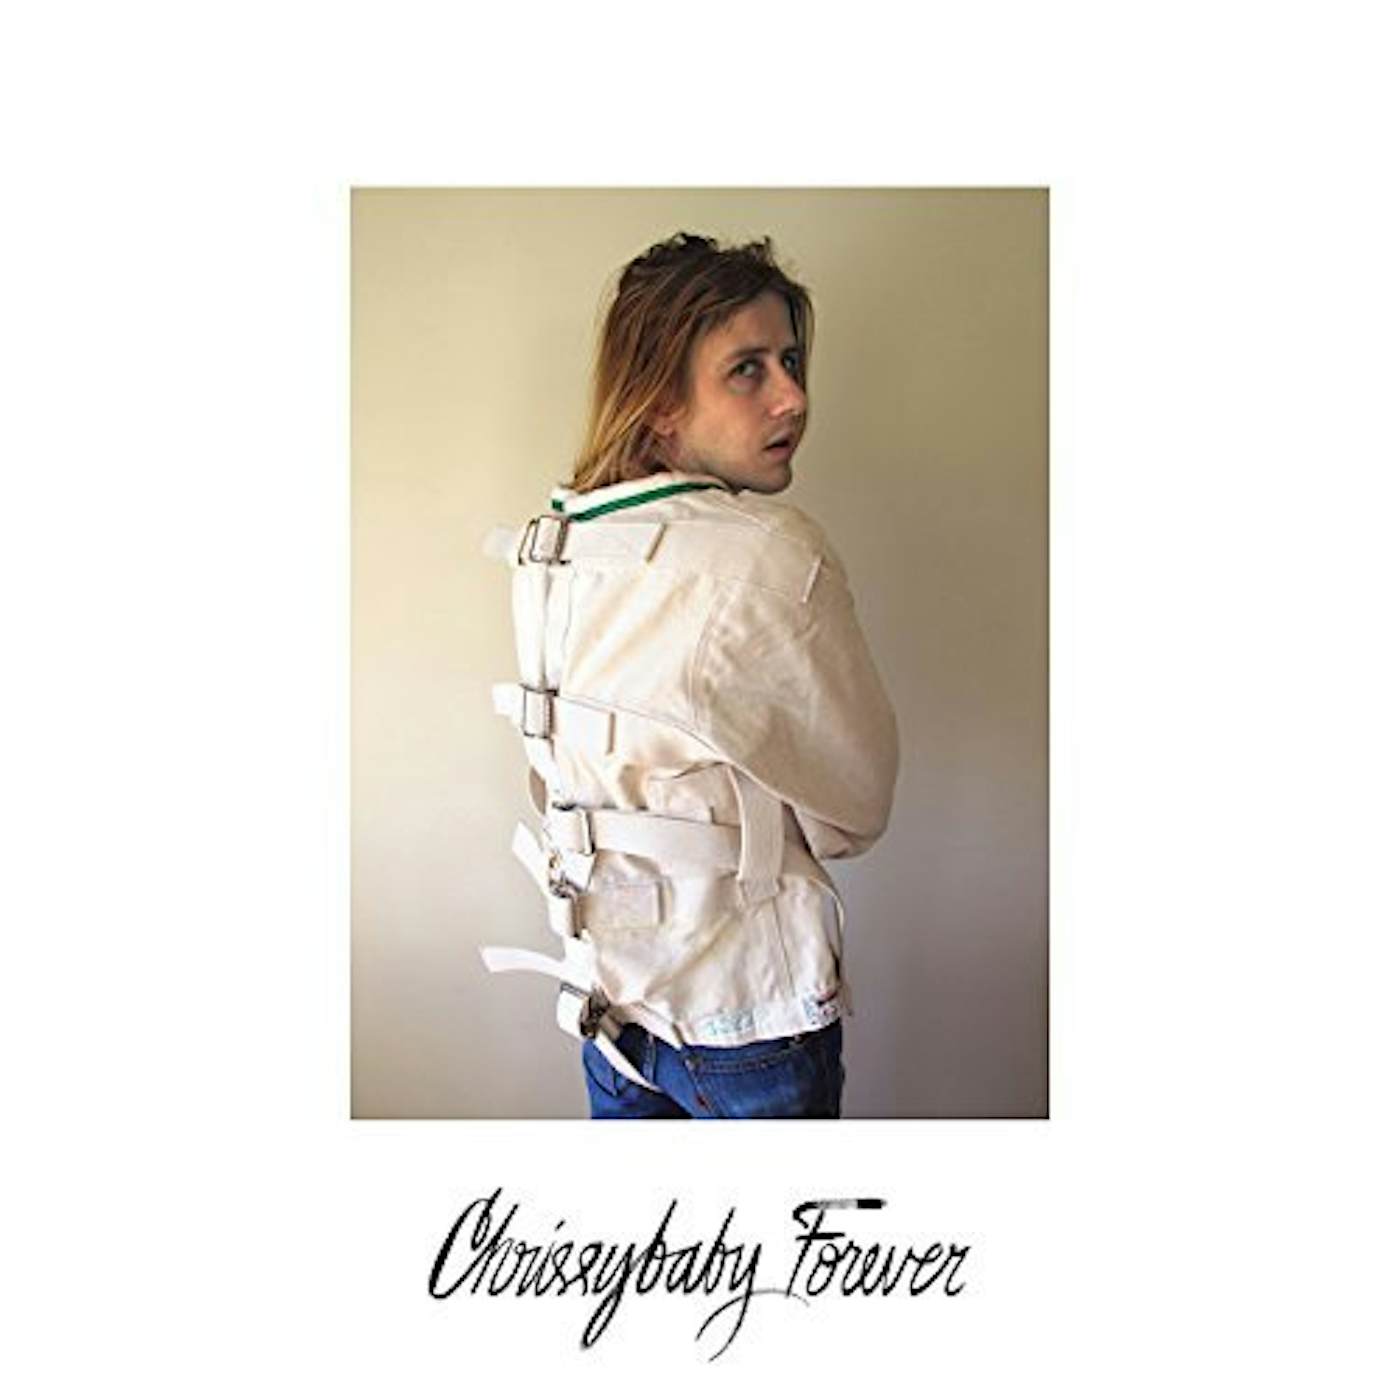 Christopher Owens Chrissybaby Forever Vinyl Record